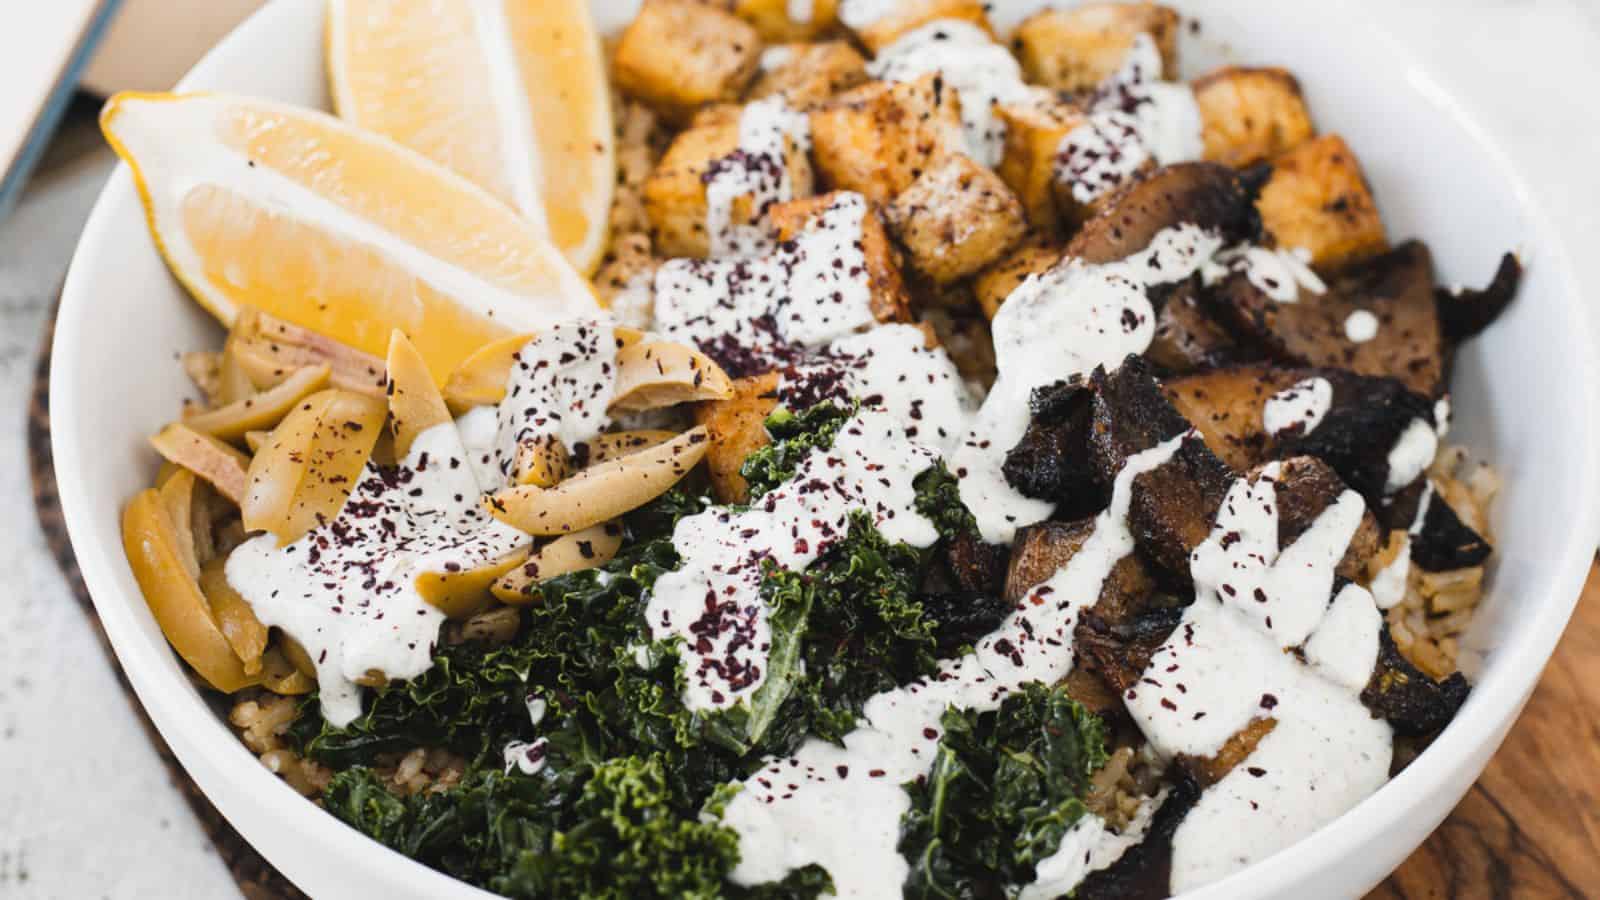 A bowl with kale, mushrooms and dressing.